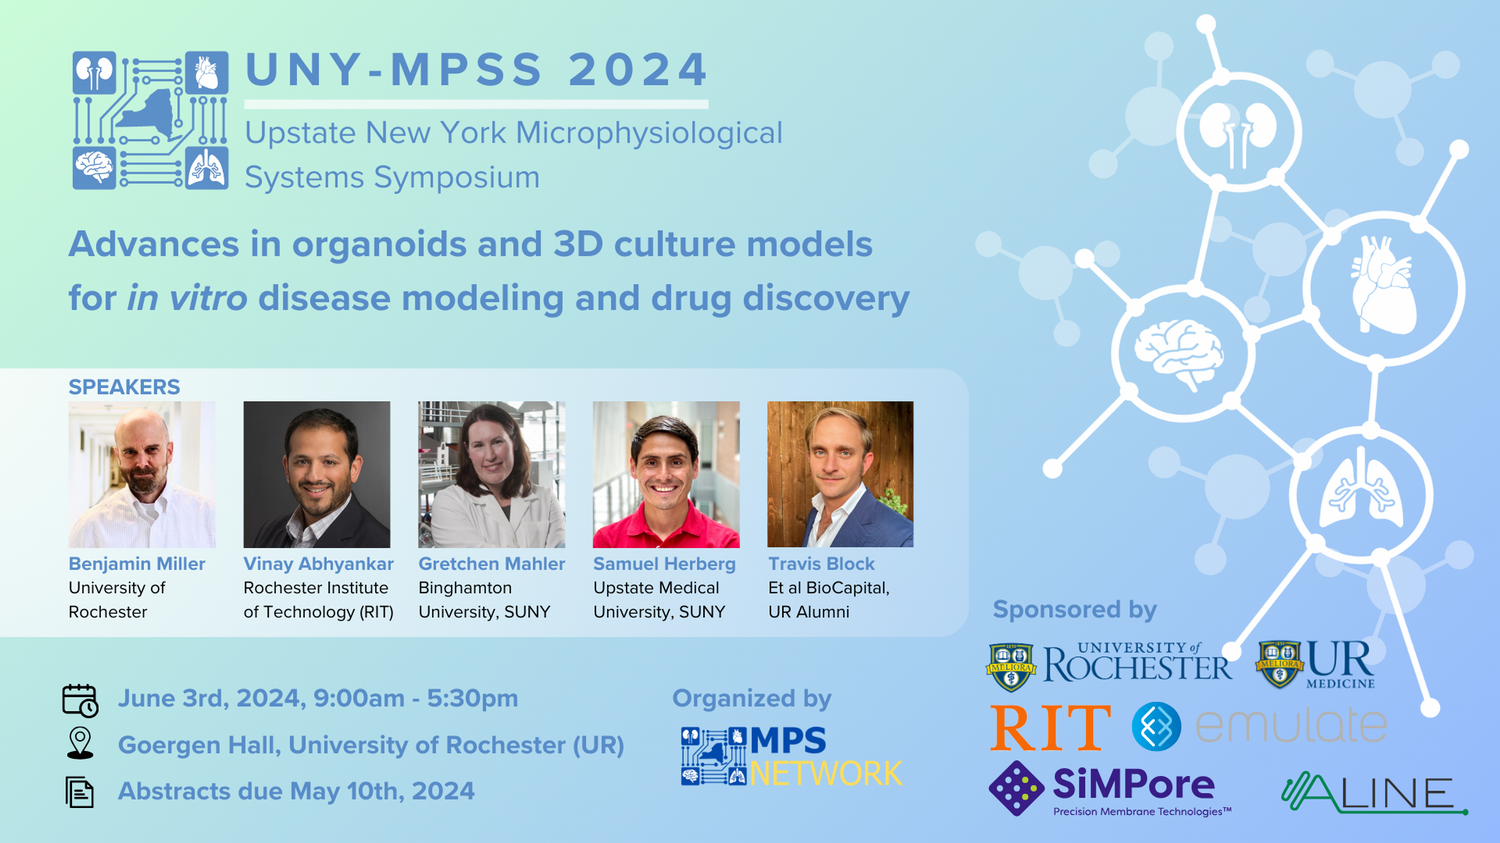 The Inaugural Upstate New York MPS Symposium (UNY-MPSS 2024)